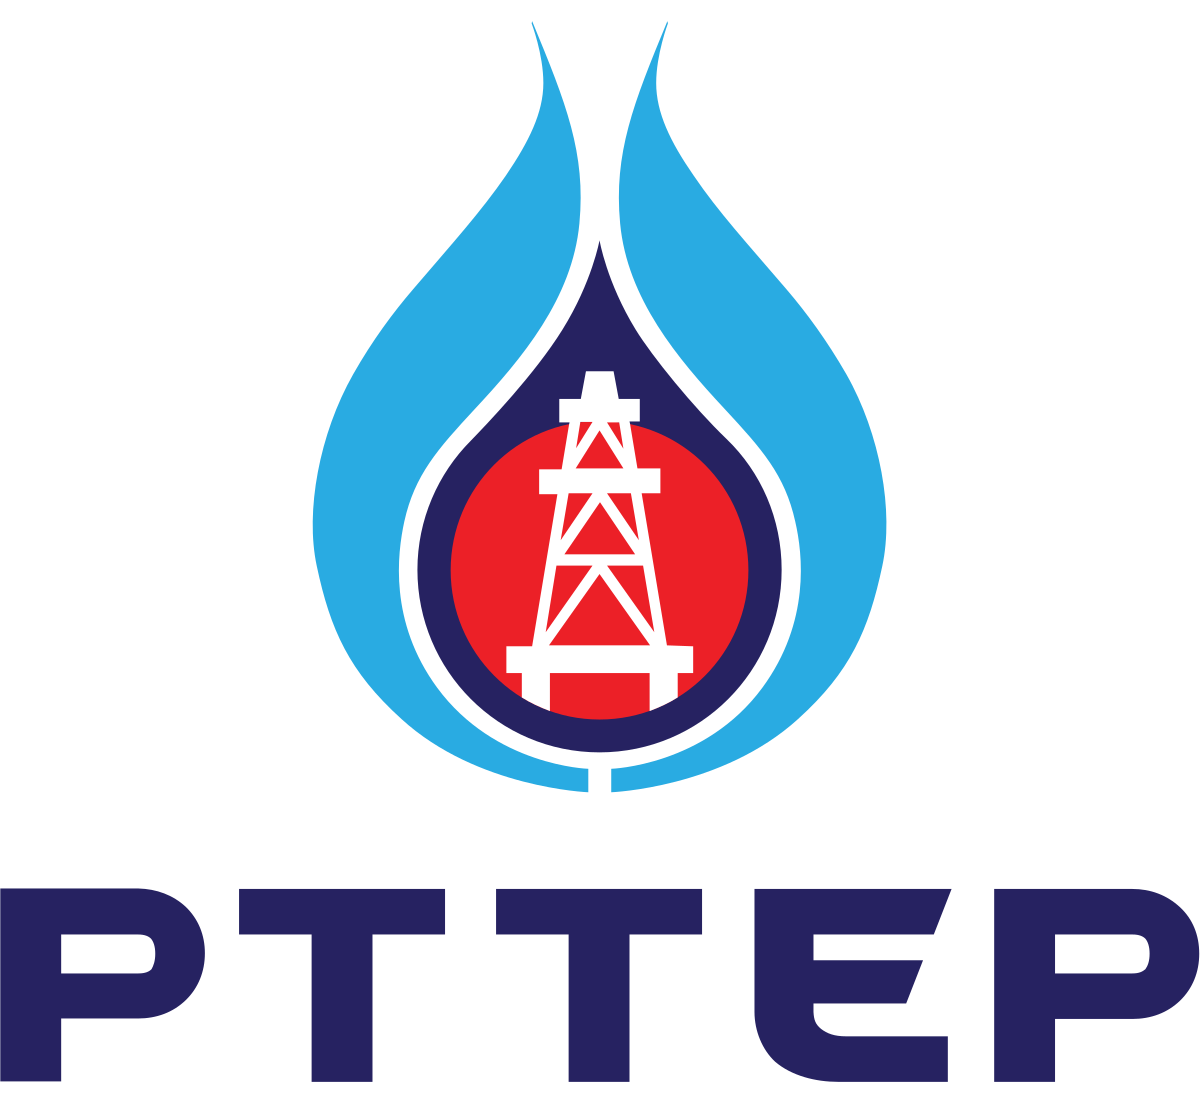 PTT EXPLORATION AND PRODUCTION PUBLIC COMPANY LIMITED